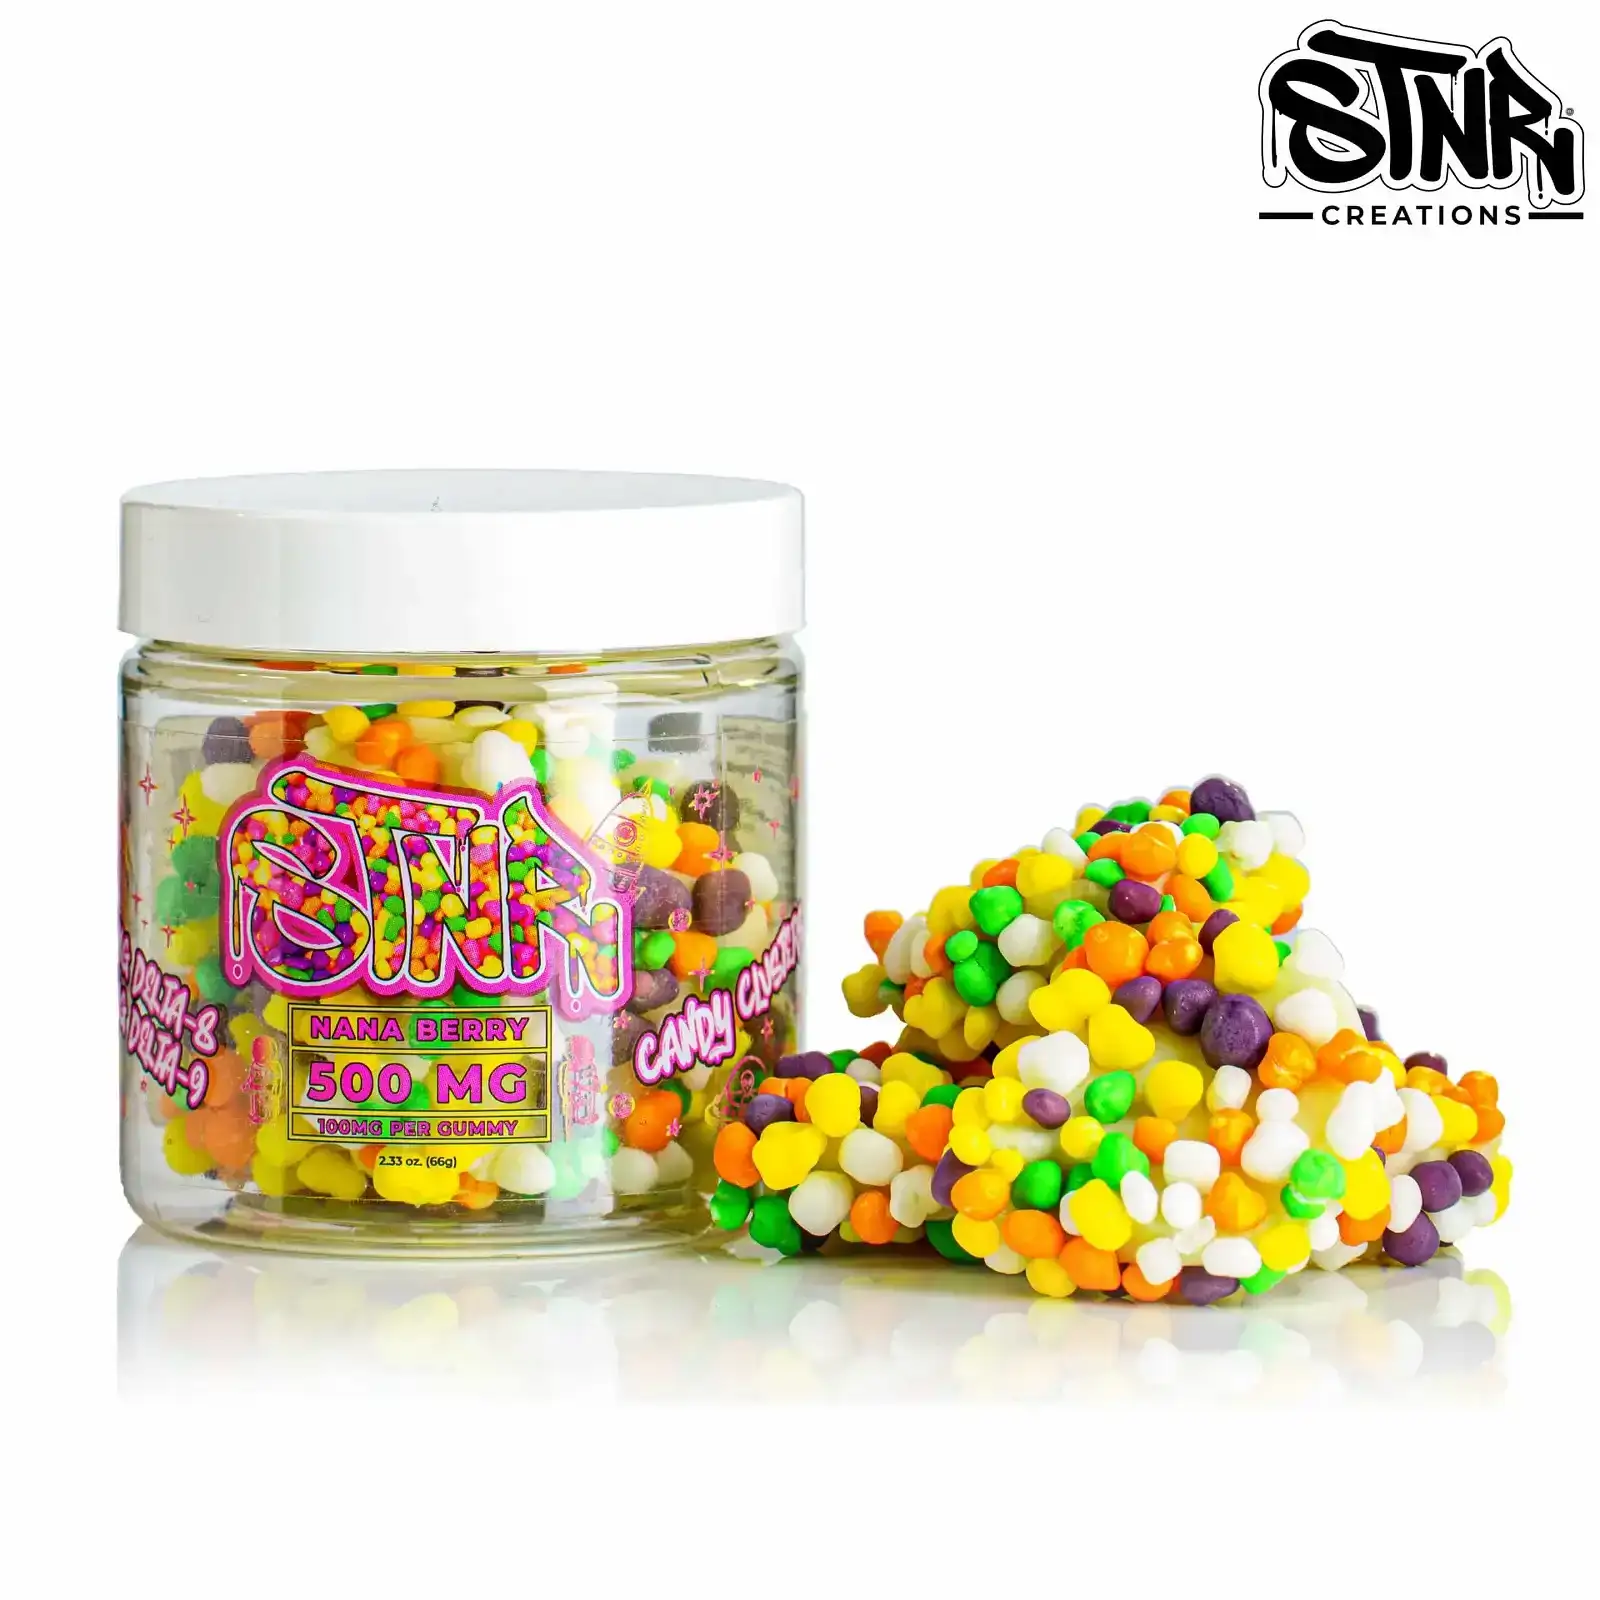 Image of STNR Creations Candy Clusters - Nana Berry